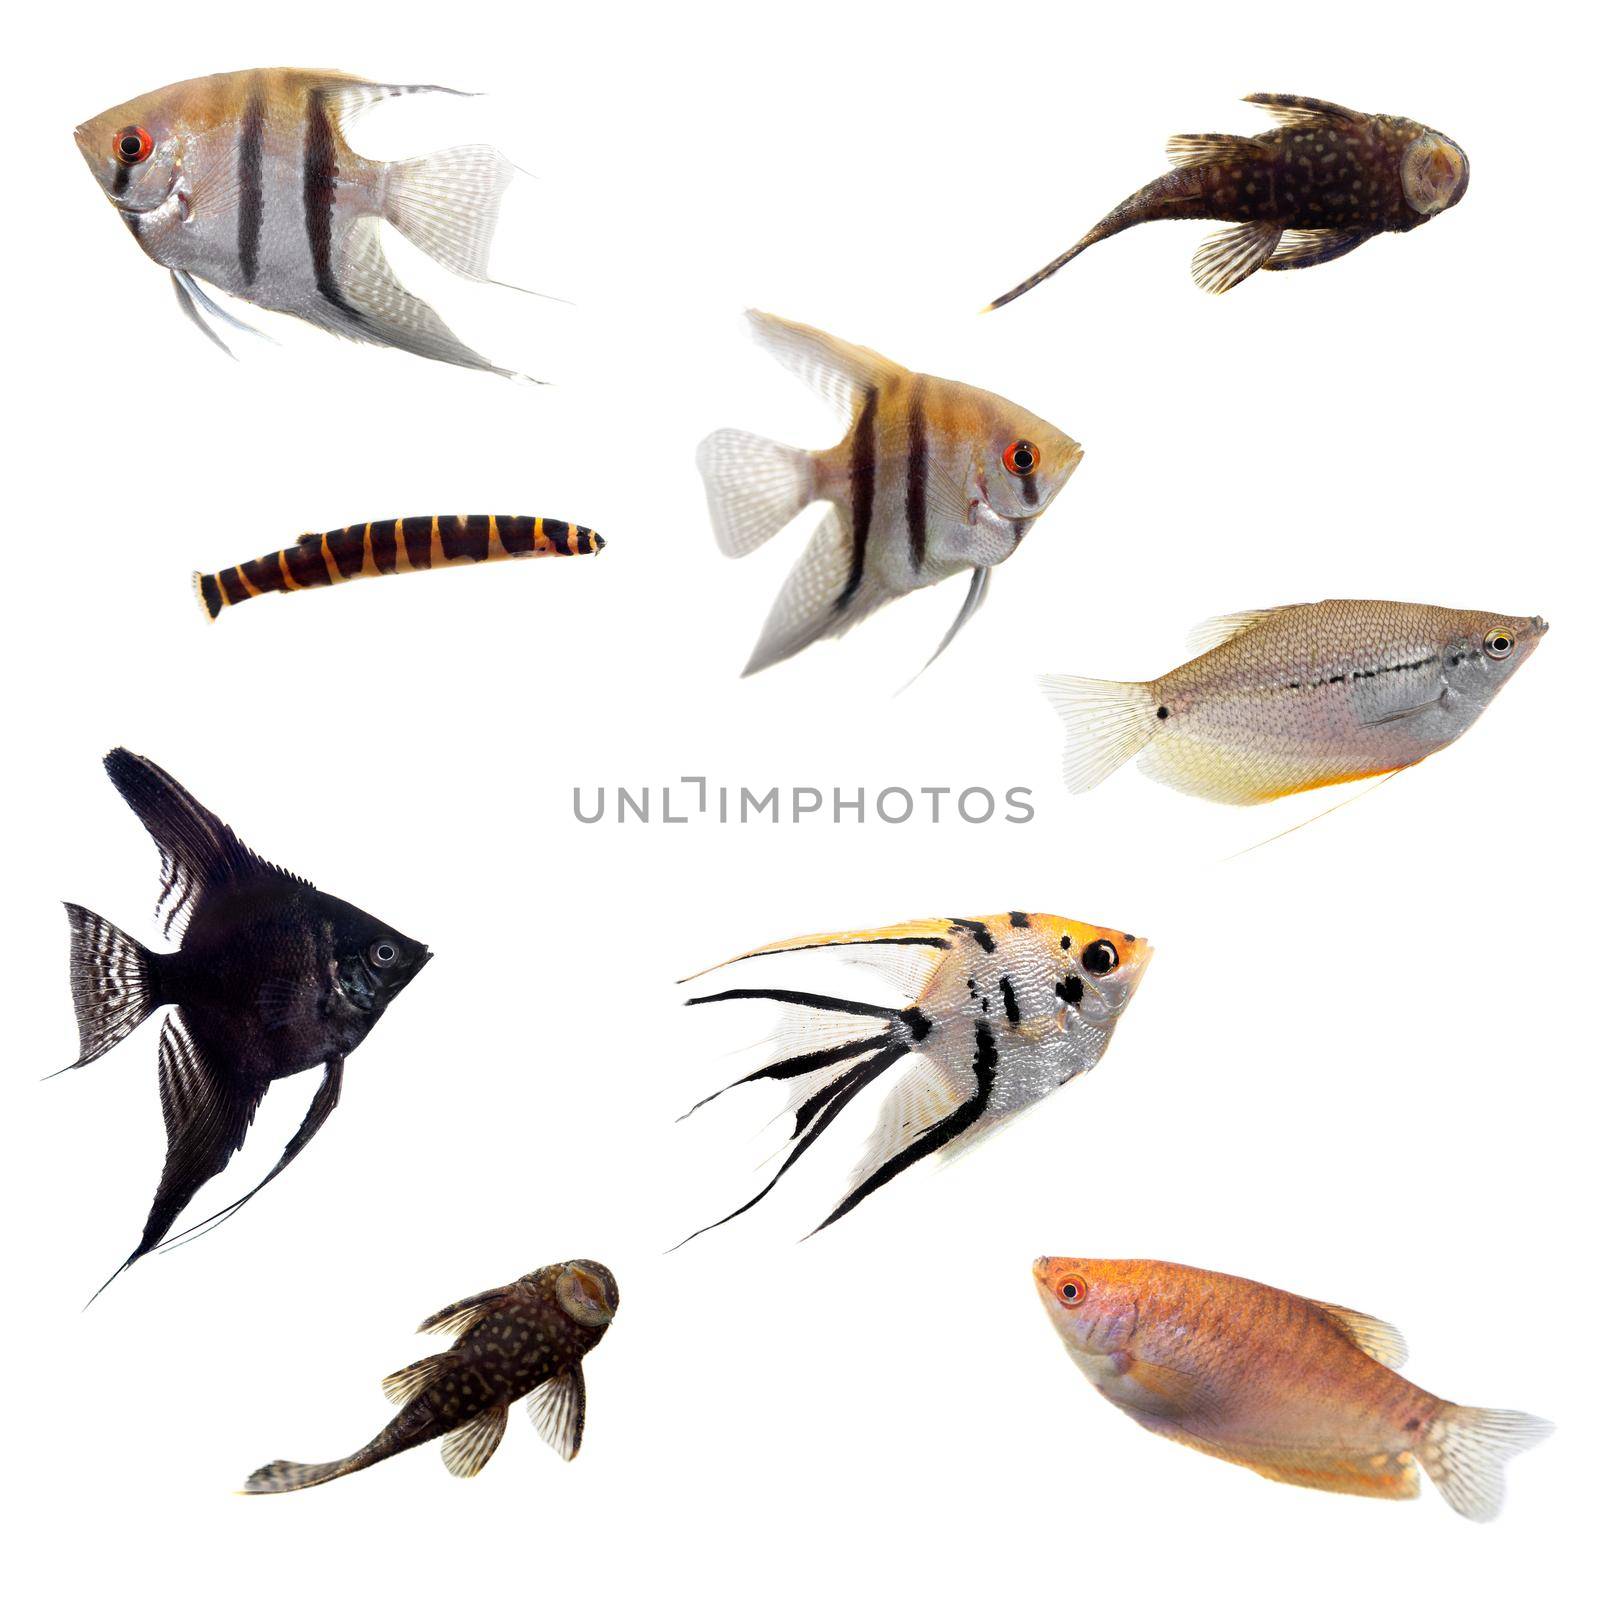 Group of decorative fishes isolated on white background